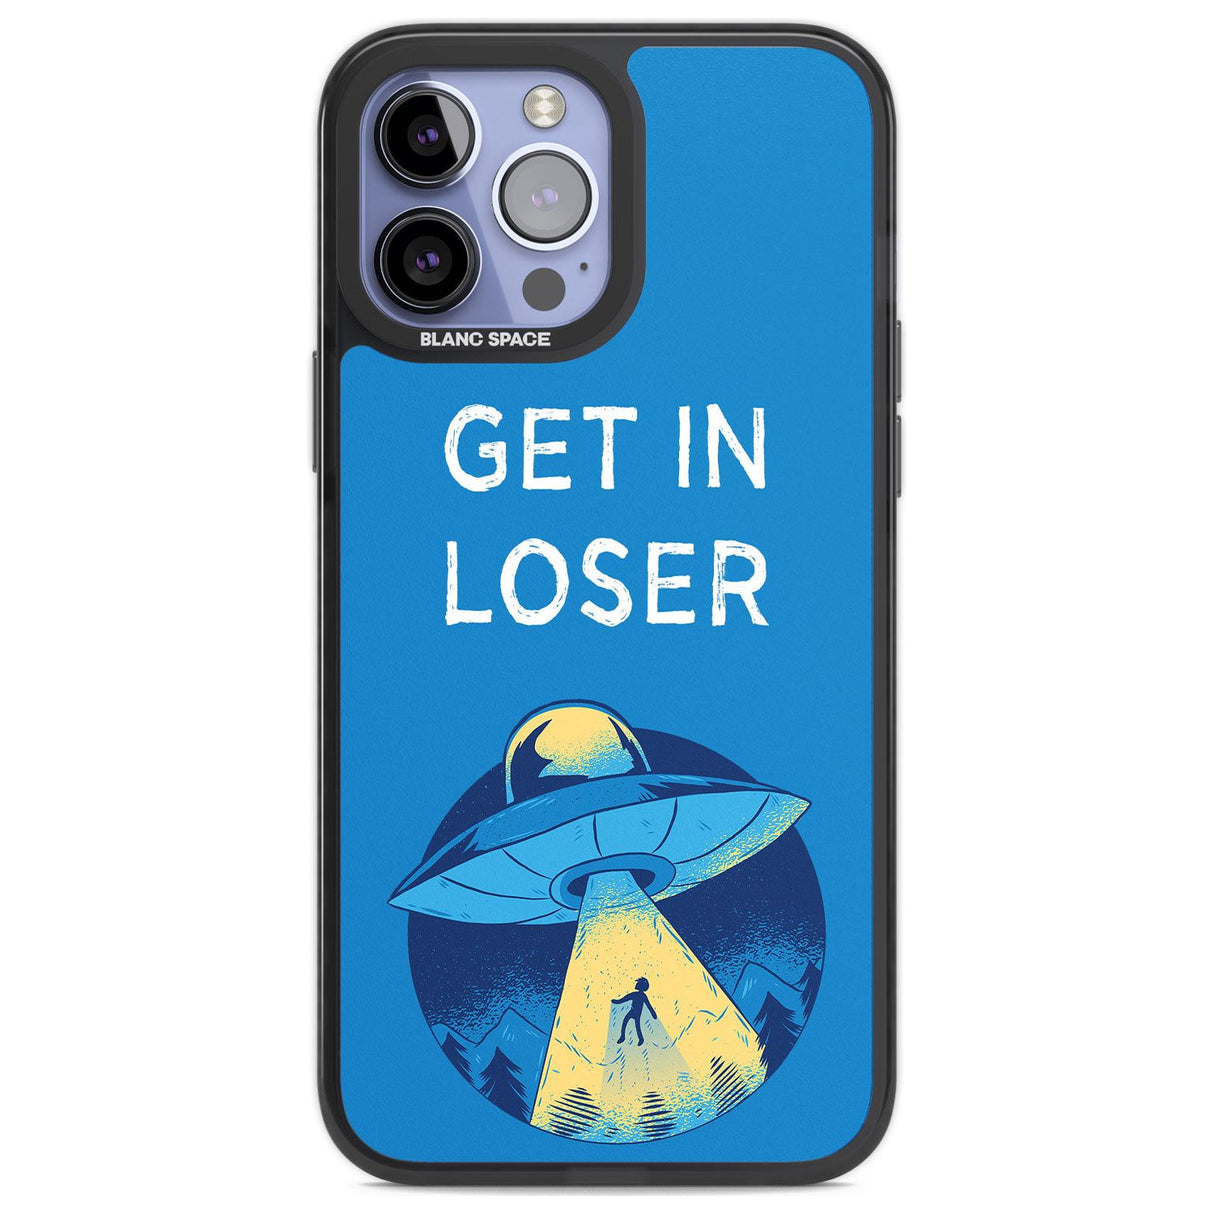 Get in Loser UFO Phone Case iPhone 14 Pro Max / Black Impact Case,iPhone 13 Pro Max / Black Impact Case Blanc Space